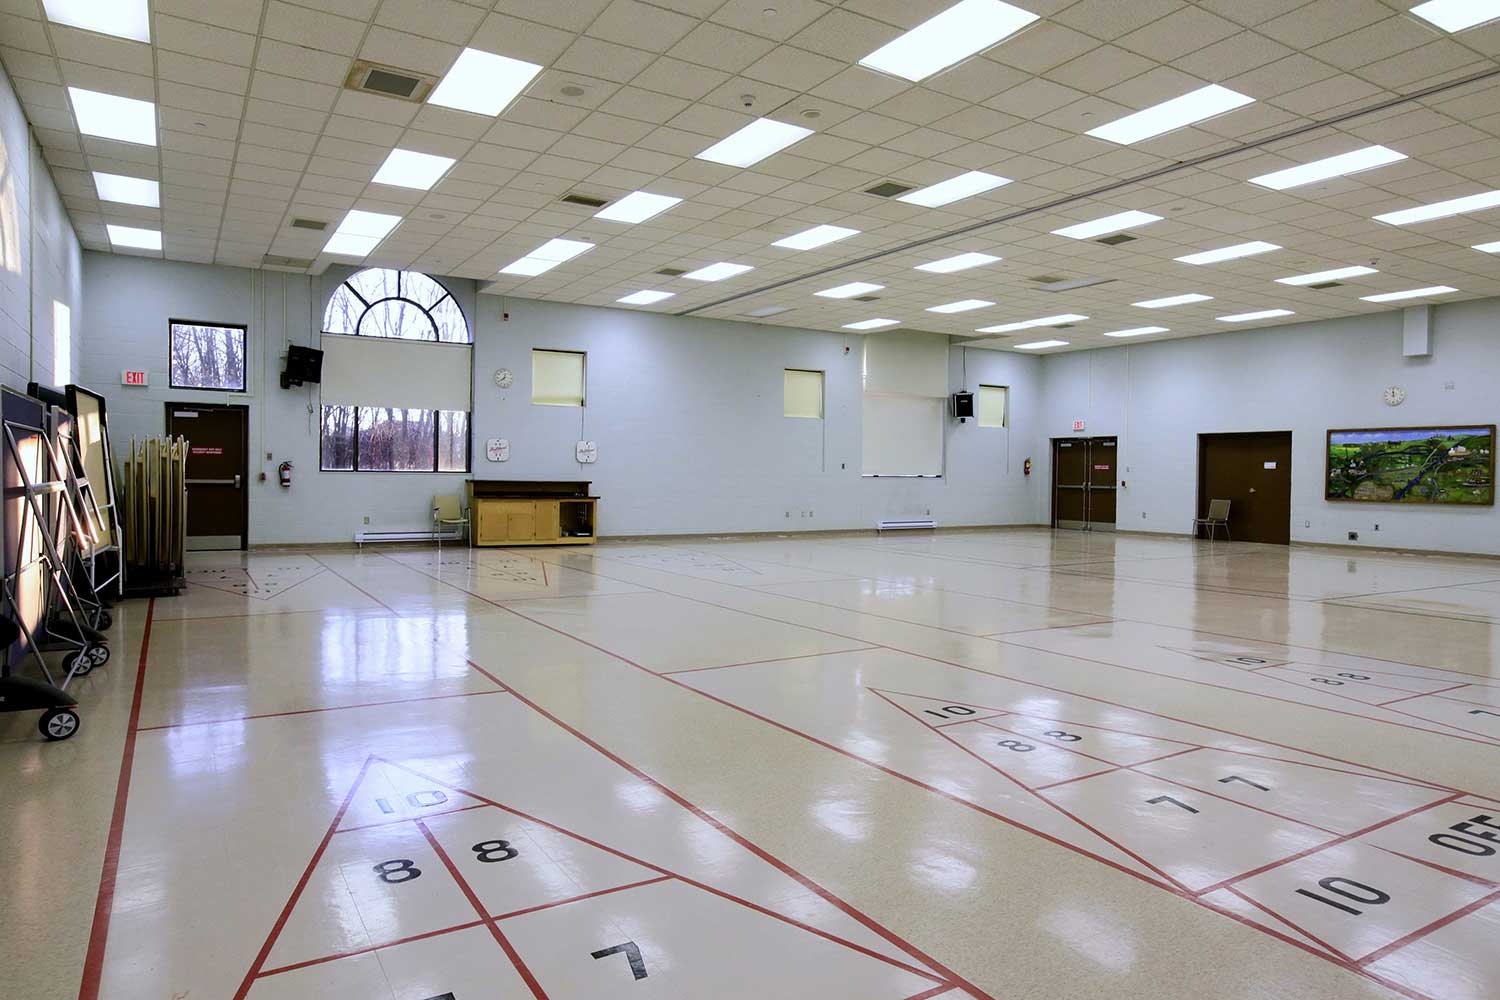 image of the gym at the Welland Community Centre